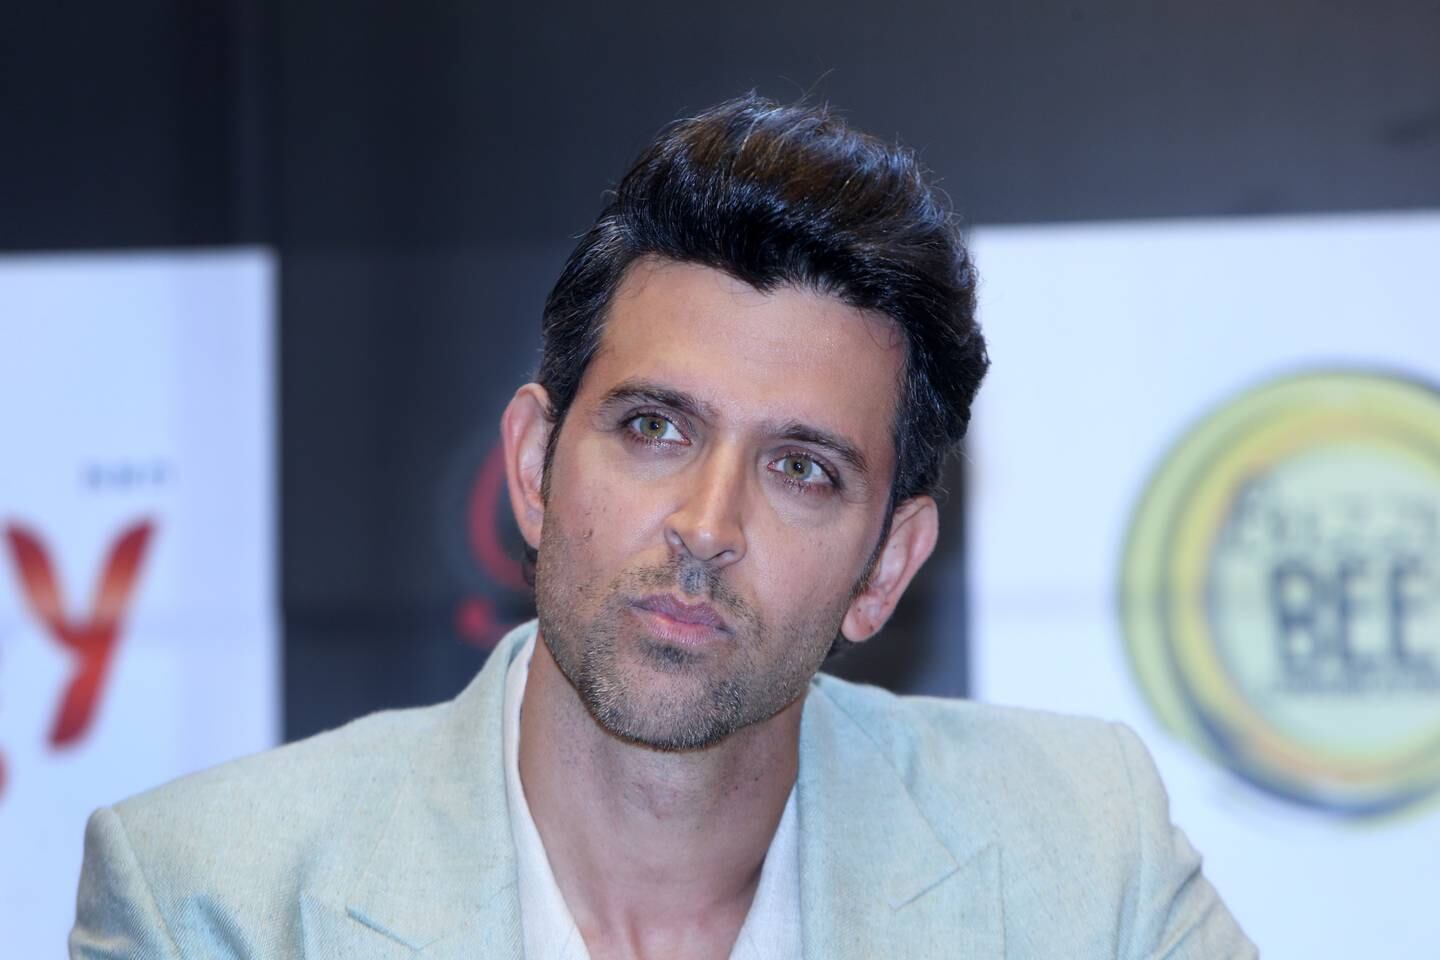 DUBAI, UNITED ARAB EMIRATES - - -  January 7, 2017 --- Bollywood superstar Hrithik Roshan was in Dubai on Saturday, January 7, 2017, to promote his upcoming action thriller "Kaabil." The press conference was held  at the Westin Hotel in Dubai.  ( DELORES JOHNSON / The National )  
ID: 26697
Reporter:  Rob Garratt
Section: AL *** Local Caption ***  DJ-070117-AL-Hrithik-26697-013.jpg